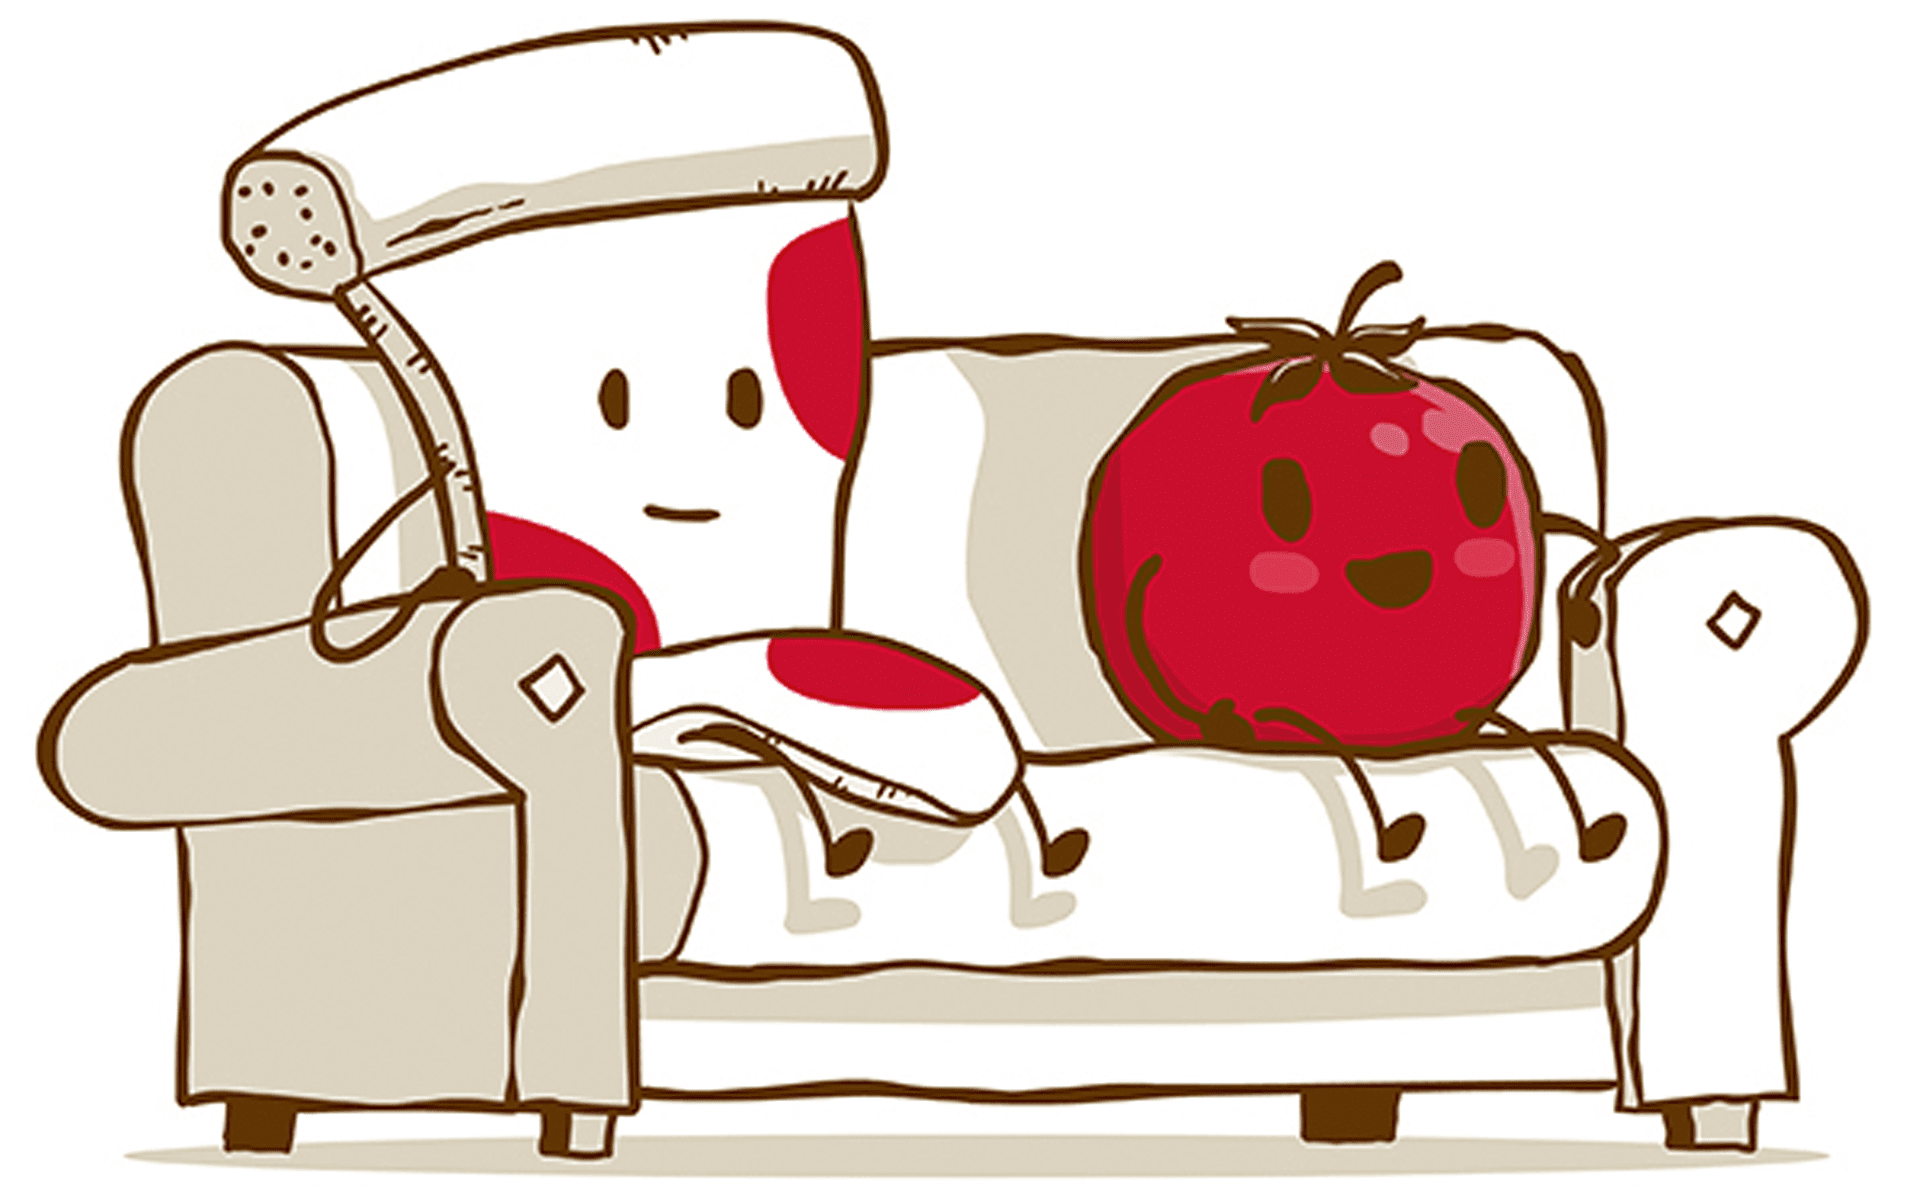 Pizza Slice and Tomato hanging out on the couch - Pizza Hut Cartoon